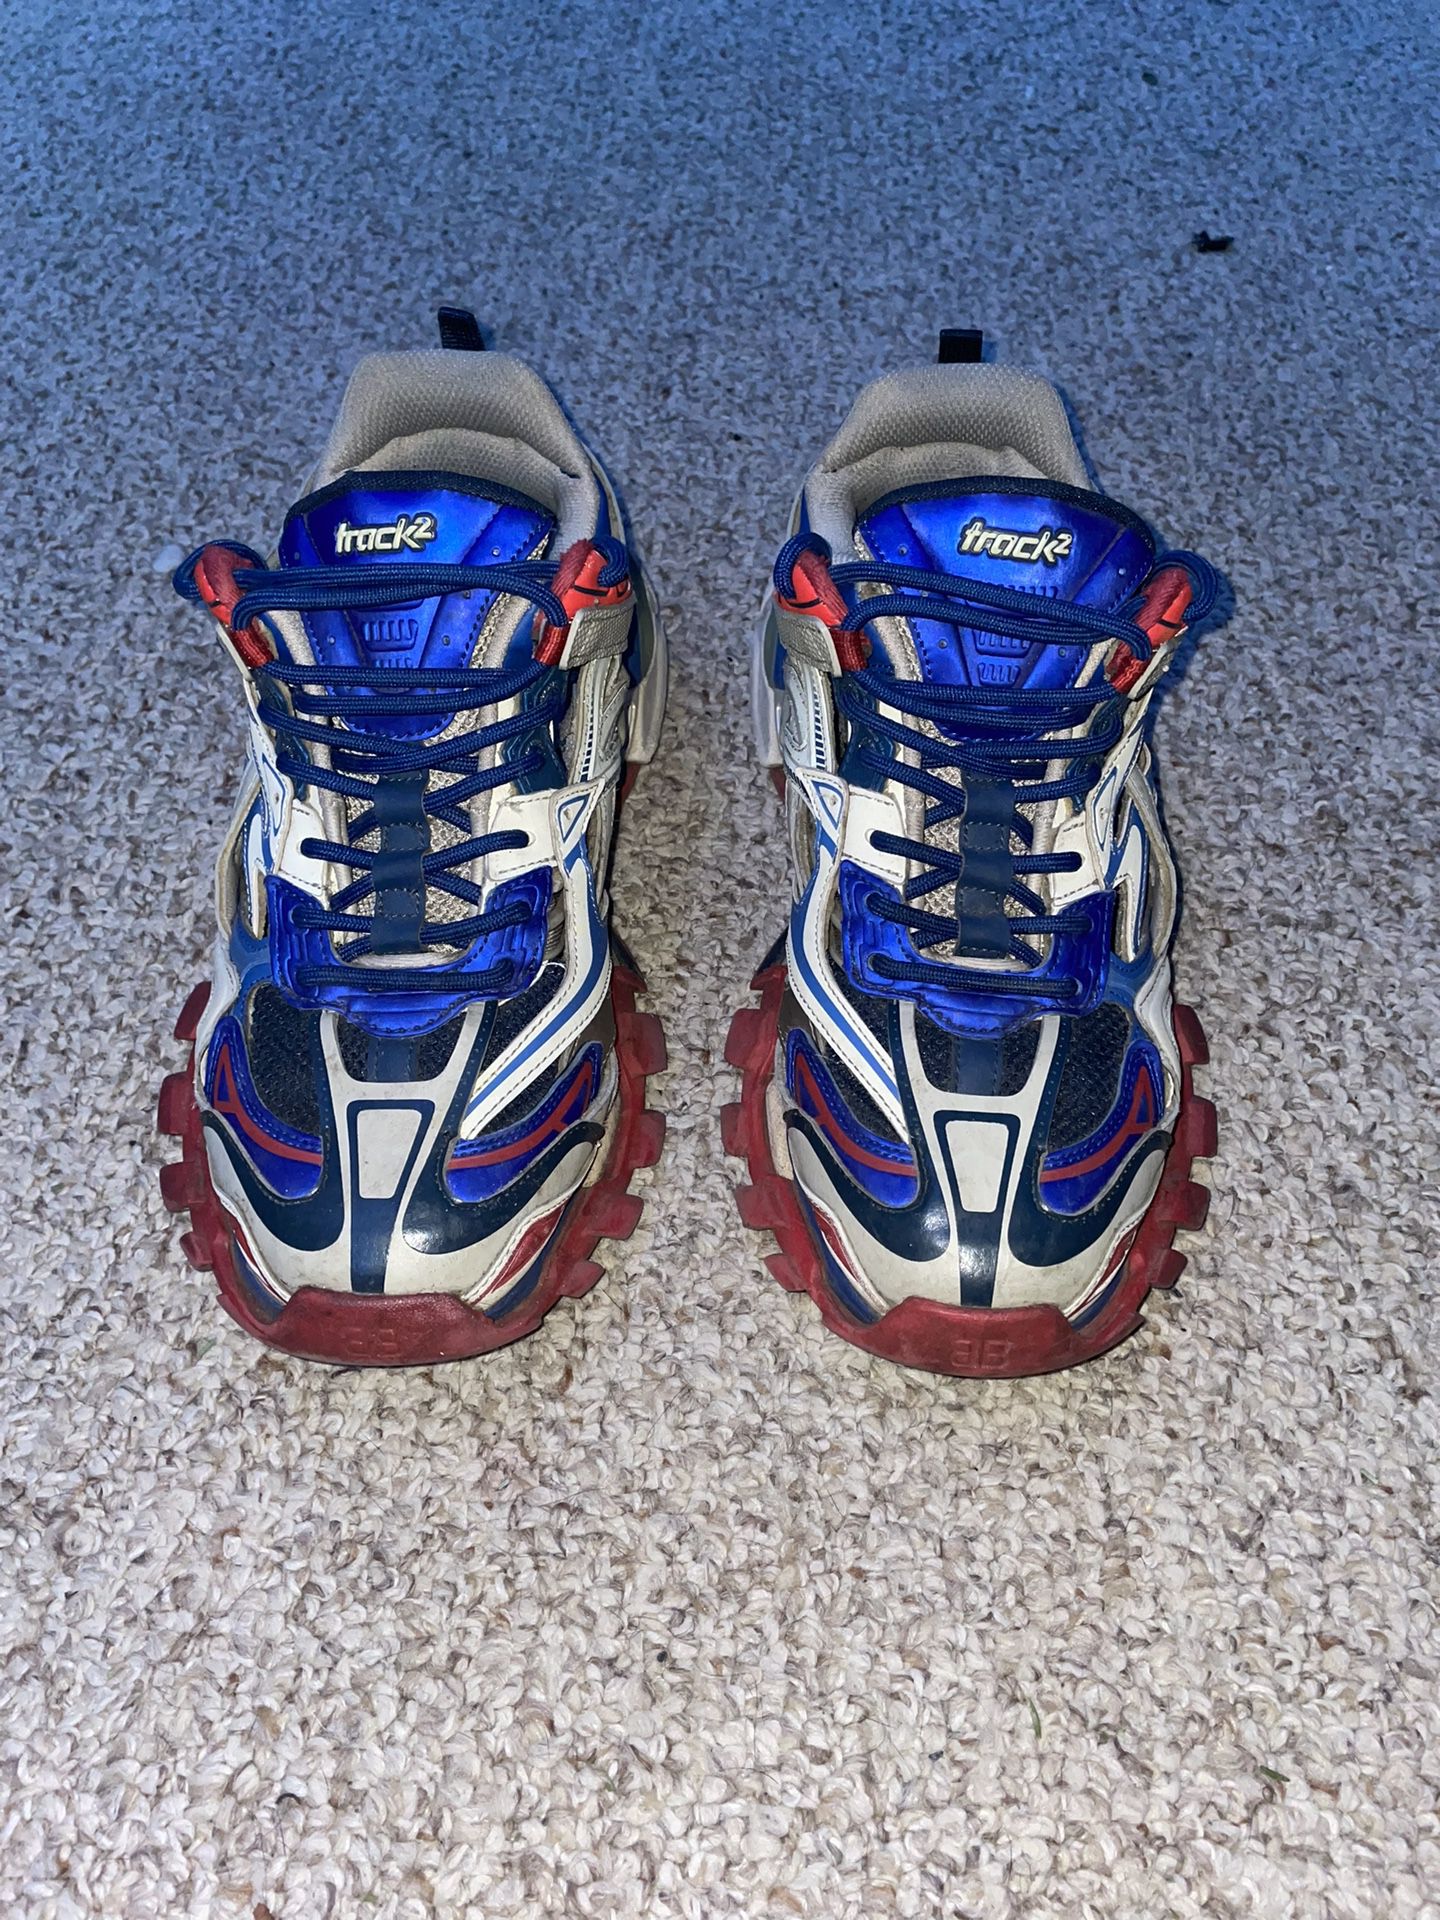 Balenciaga Track 2 for Sale in Bronx, NY - OfferUp